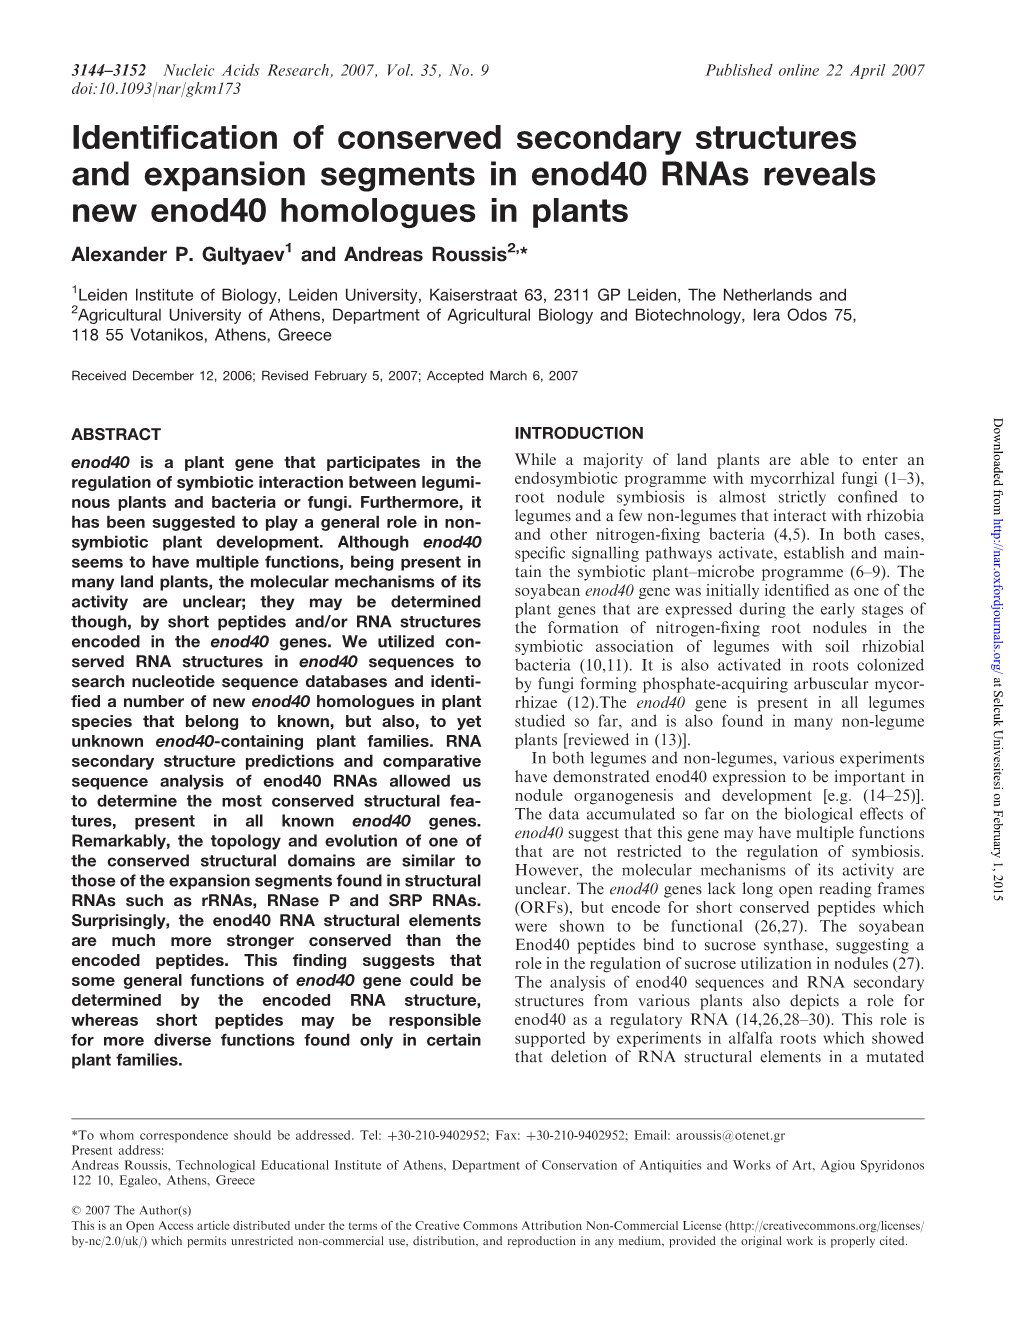 Identification of Conserved Secondary Structures and Expansion Segments in Enod40 Rnas Reveals New Enod40 Homologues in Plants Alexander P